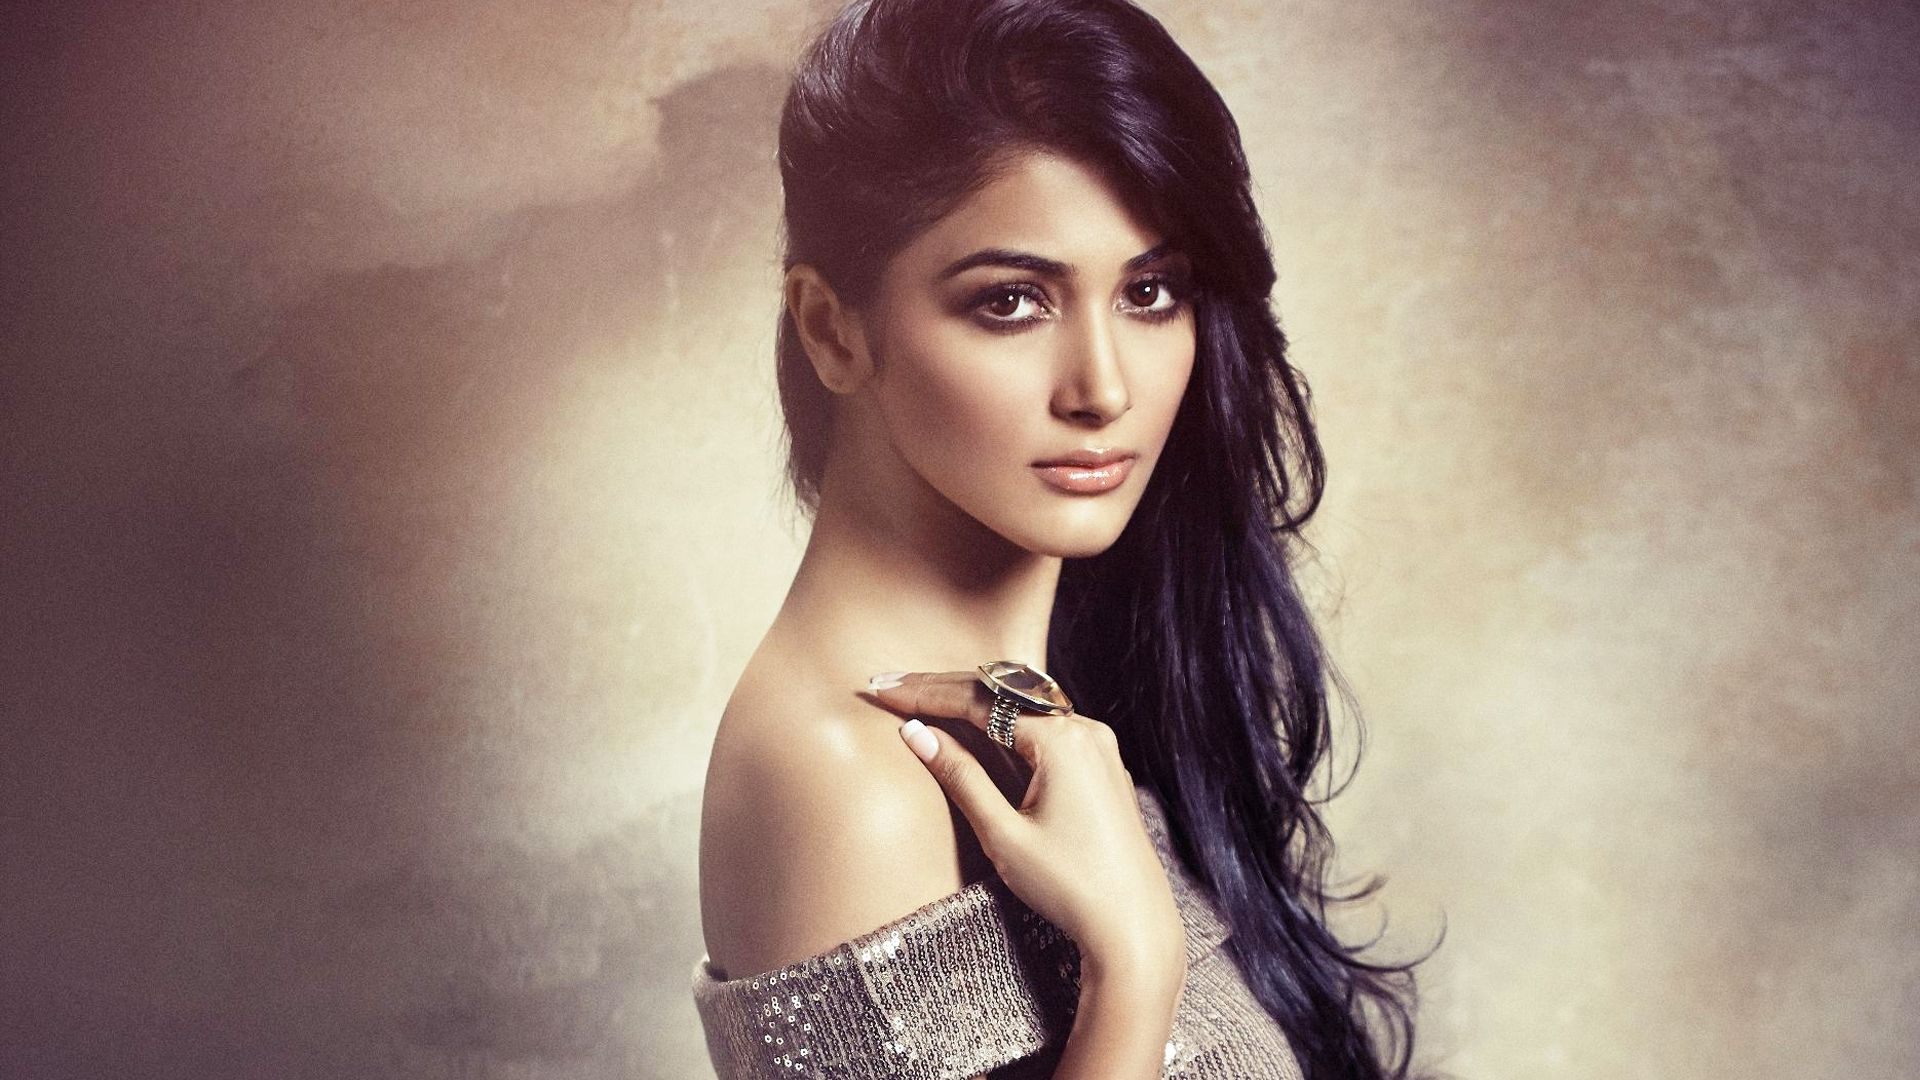 Pooja Hegde Bollywood Actress wallpaper in 1920x1080 resolution